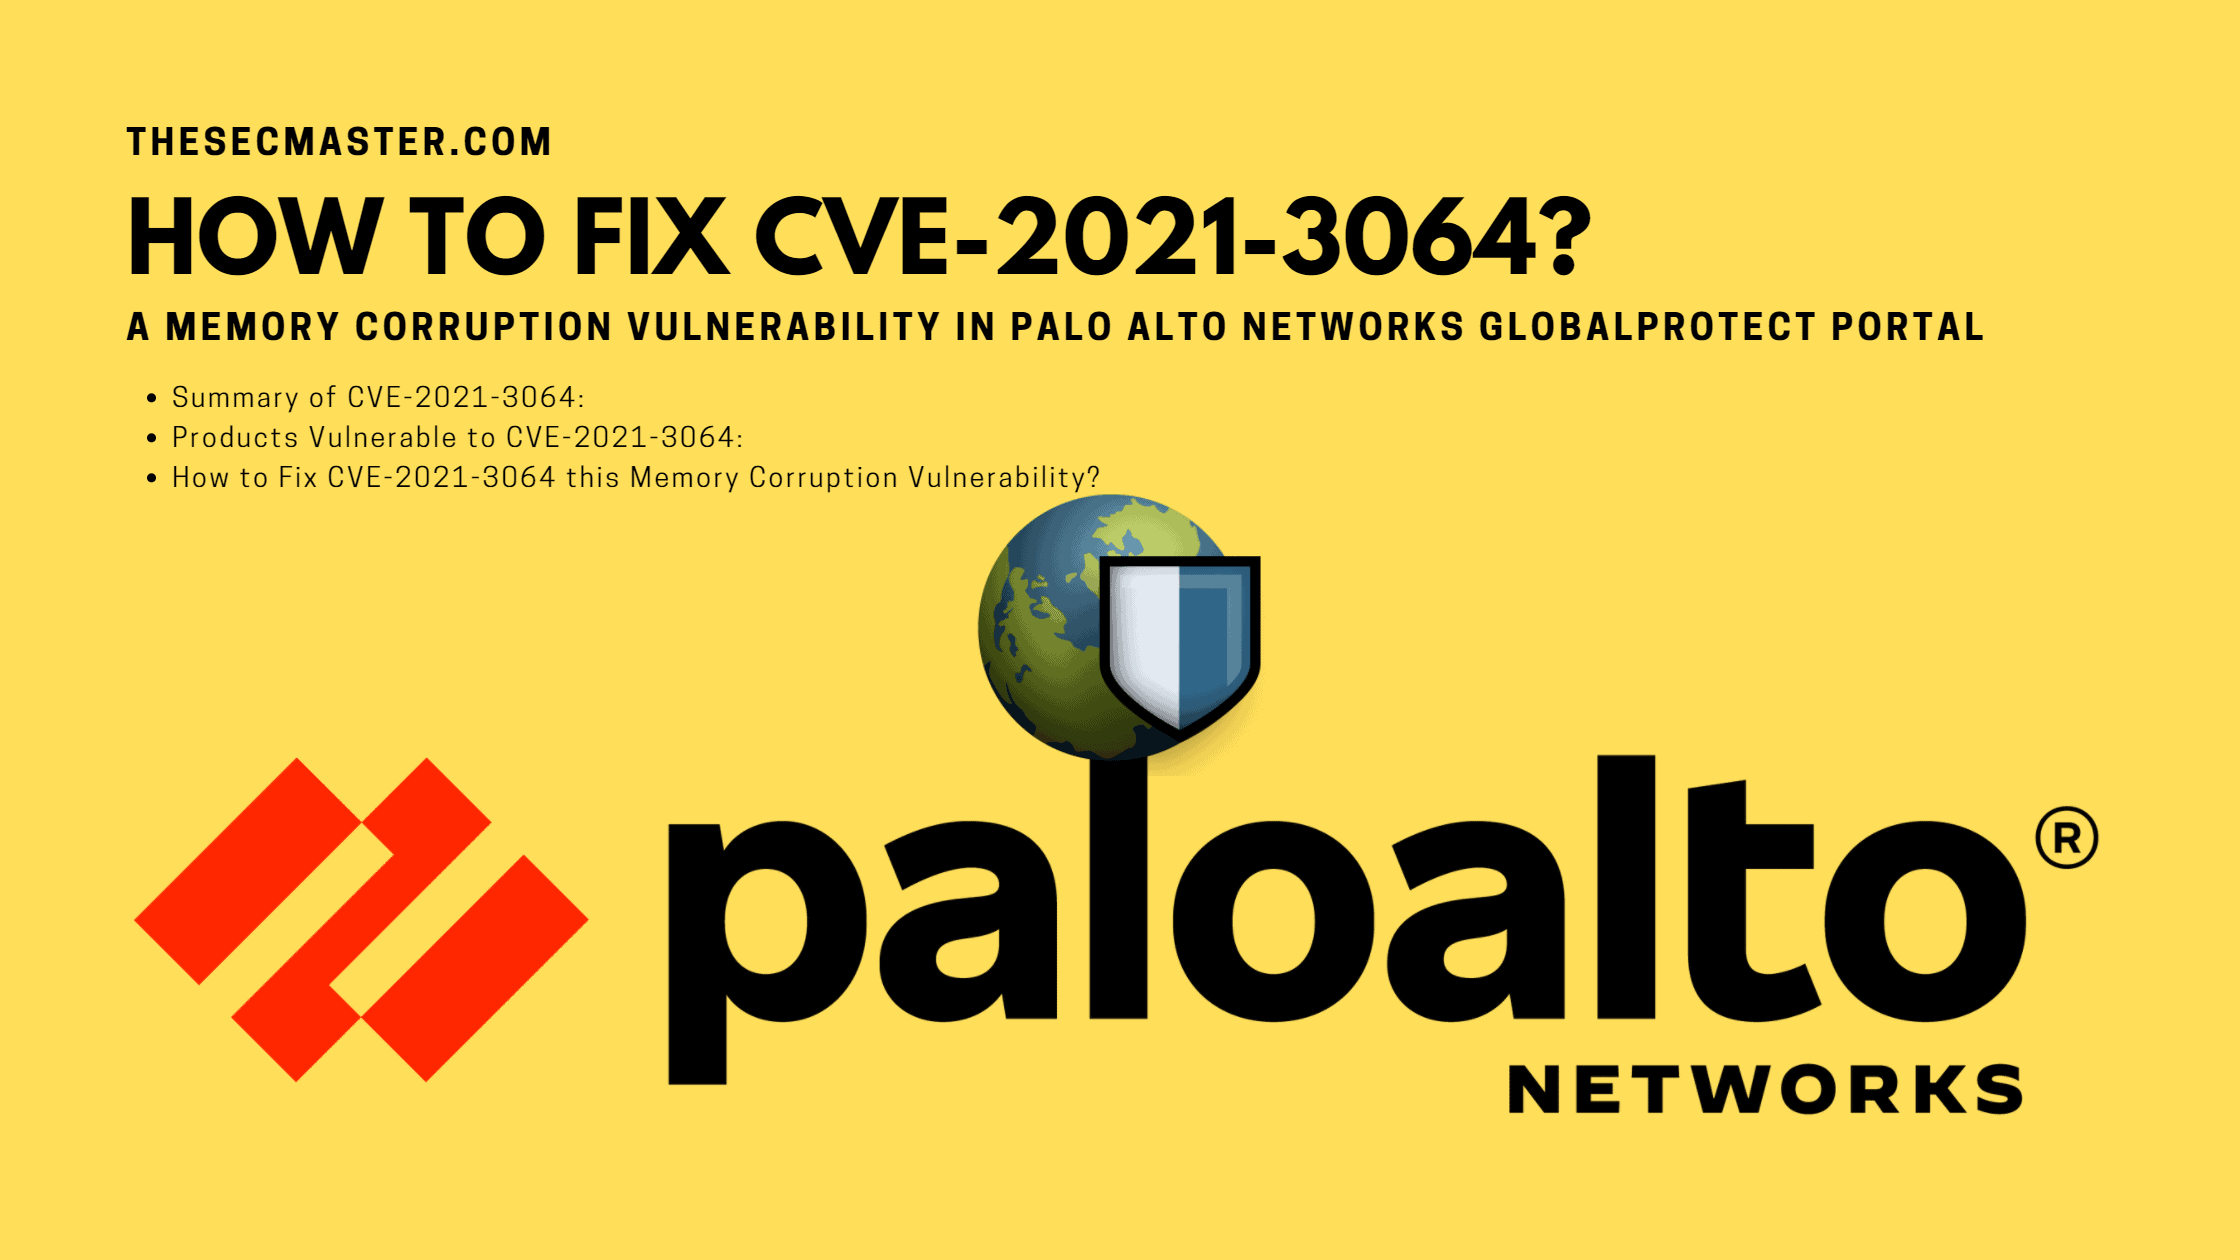 How To Fix Cve 2021 3064 A Memory Corruption Vulnerability In Palo Alto Networks Globalprotect Portal